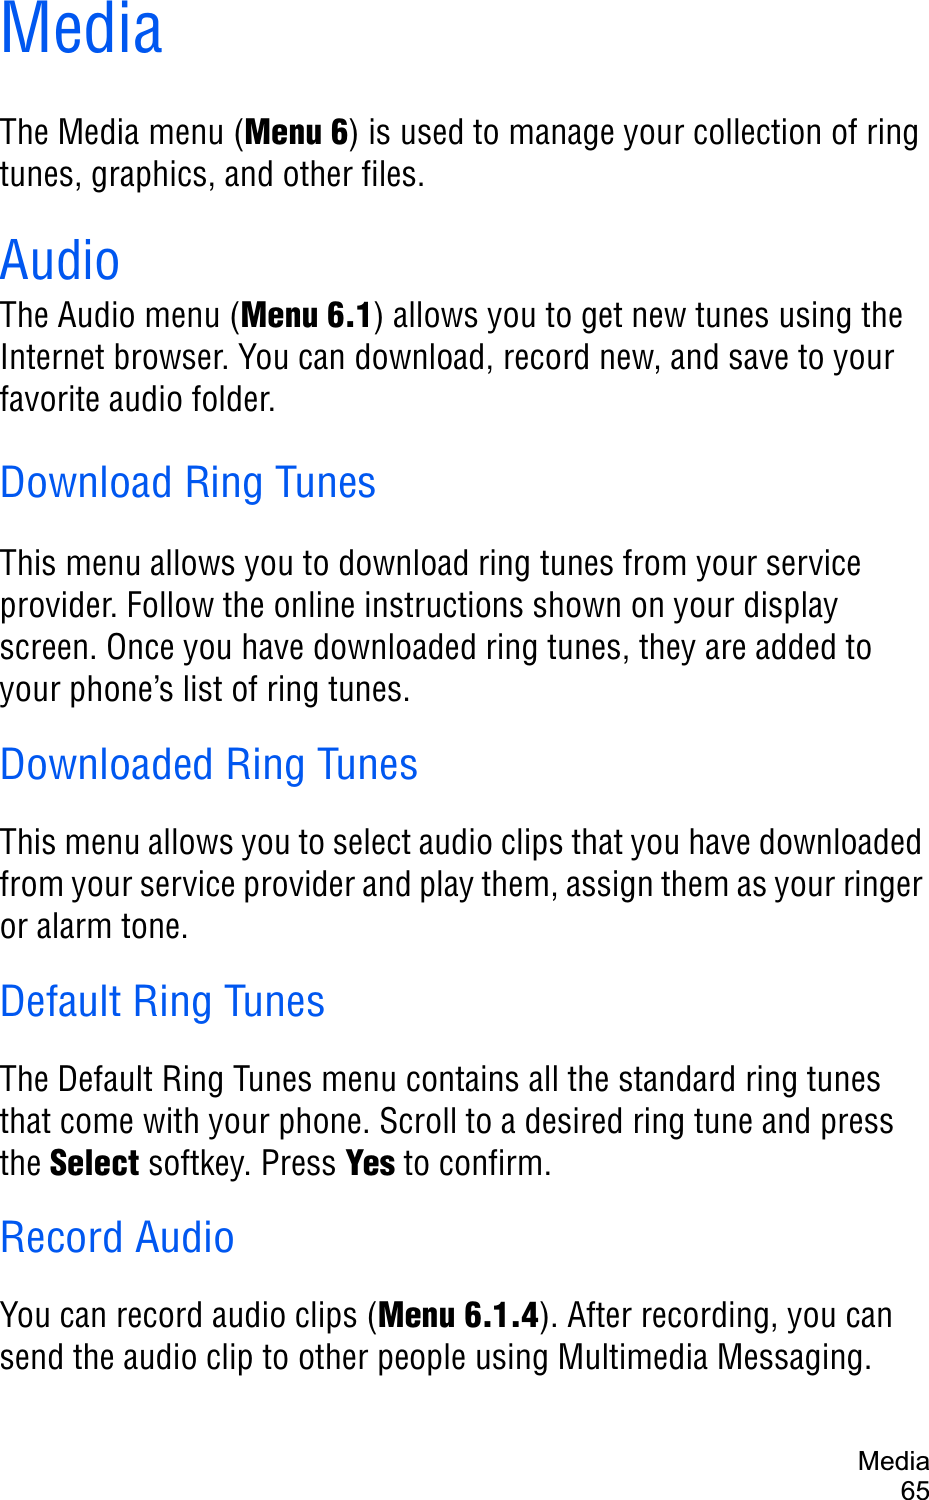 Media65MediaThe Media menu (Menu 6) is used to manage your collection of ring tunes, graphics, and other files.AudioThe Audio menu (Menu 6.1) allows you to get new tunes using the Internet browser. You can download, record new, and save to your favorite audio folder.Download Ring TunesThis menu allows you to download ring tunes from your service provider. Follow the online instructions shown on your display screen. Once you have downloaded ring tunes, they are added to your phone’s list of ring tunes.Downloaded Ring TunesThis menu allows you to select audio clips that you have downloaded from your service provider and play them, assign them as your ringer or alarm tone. Default Ring TunesThe Default Ring Tunes menu contains all the standard ring tunes that come with your phone. Scroll to a desired ring tune and press the Select softkey. Press Yes to confirm.Record AudioYou can record audio clips (Menu 6.1.4). After recording, you can send the audio clip to other people using Multimedia Messaging.